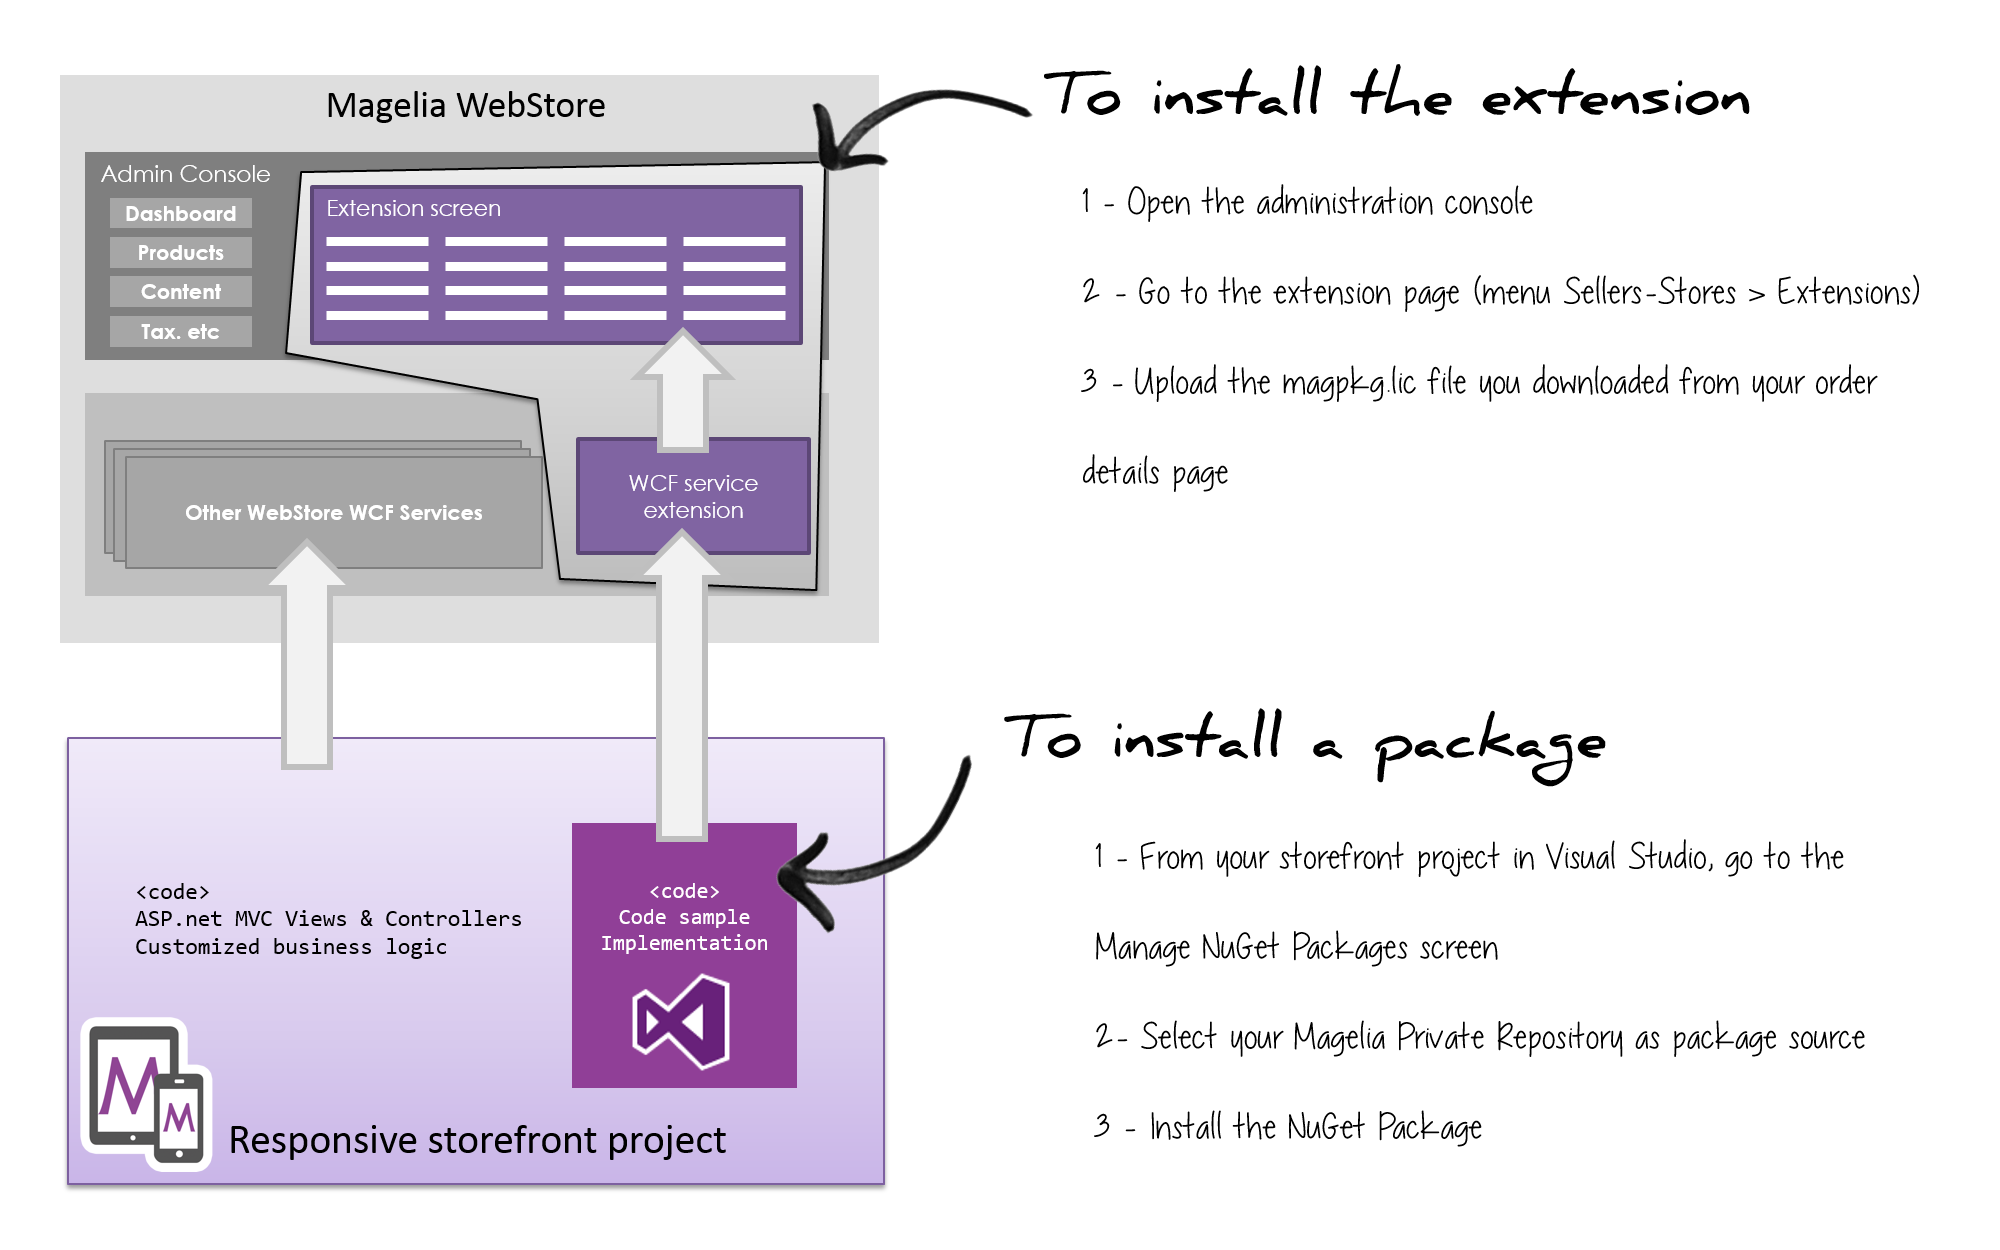 Installation of Magelia Webstore extensions and packages